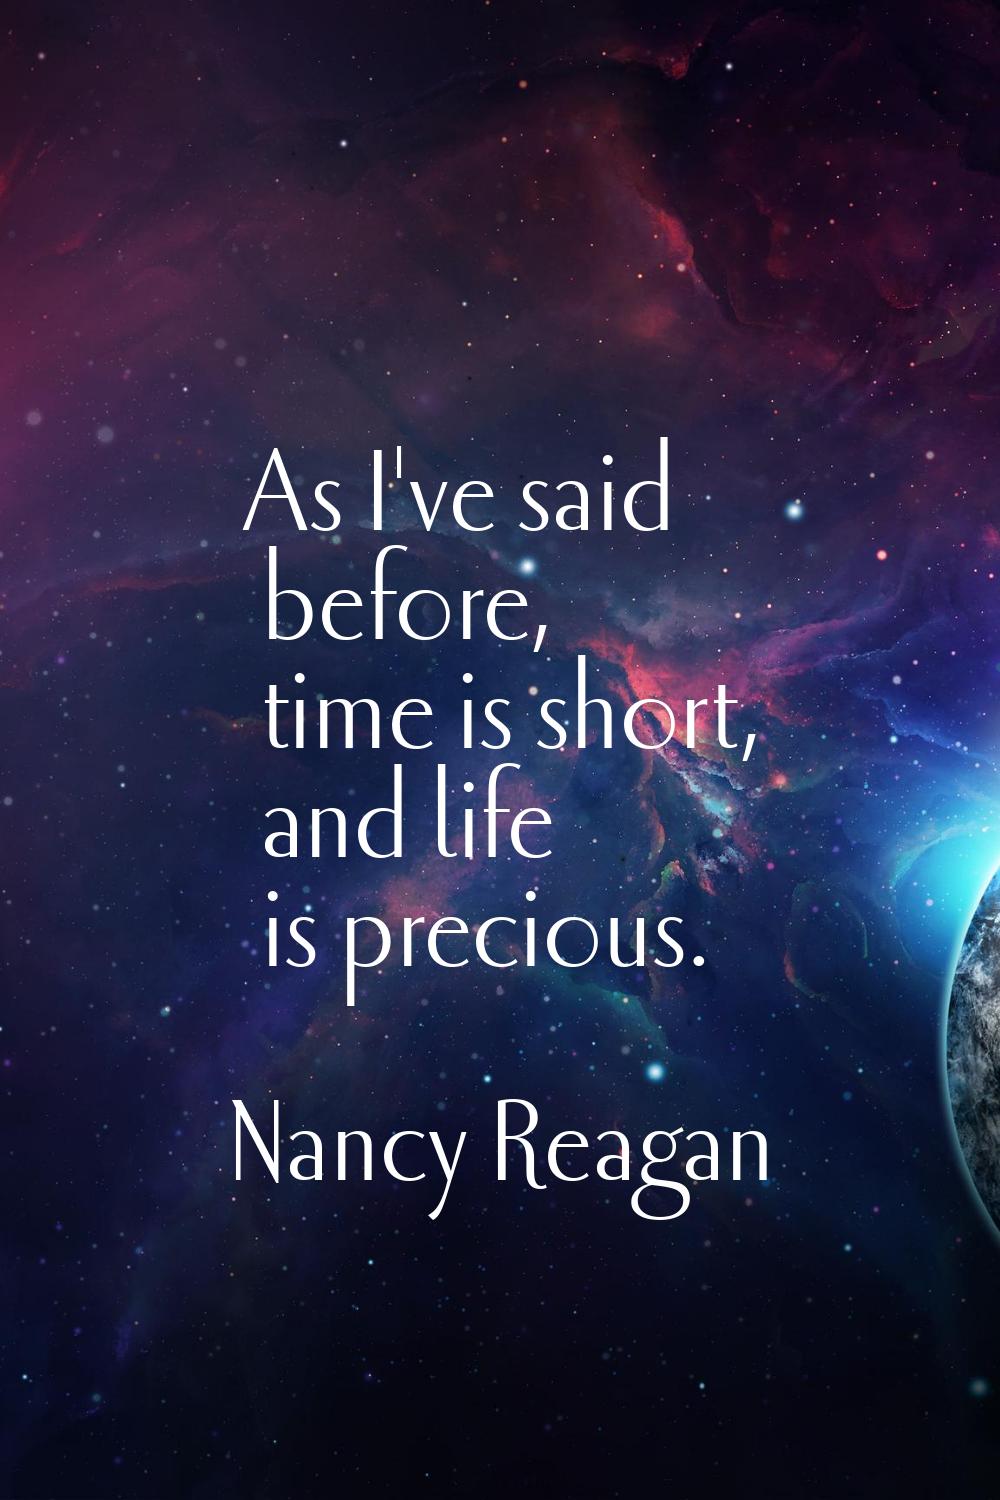 As I've said before, time is short, and life is precious.